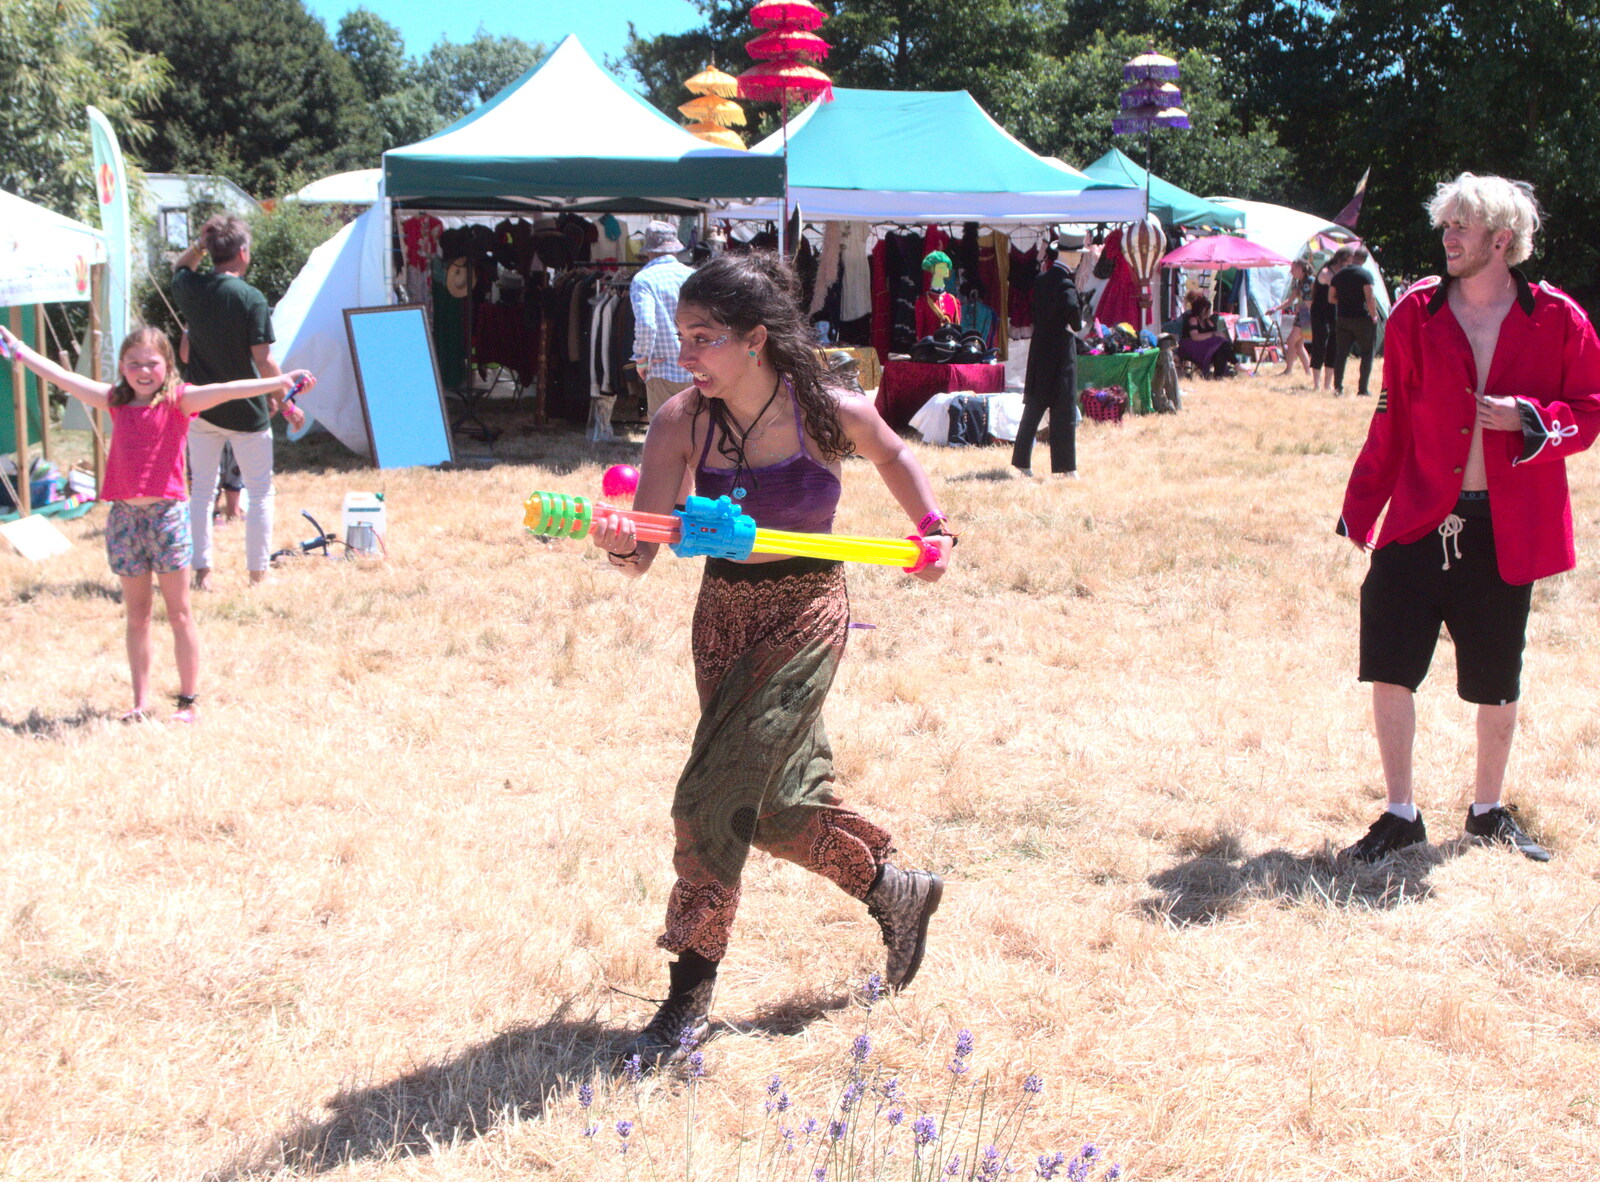 More water fights from WoW Festival, Burston, Norfolk - 29th June - 1st July 2018